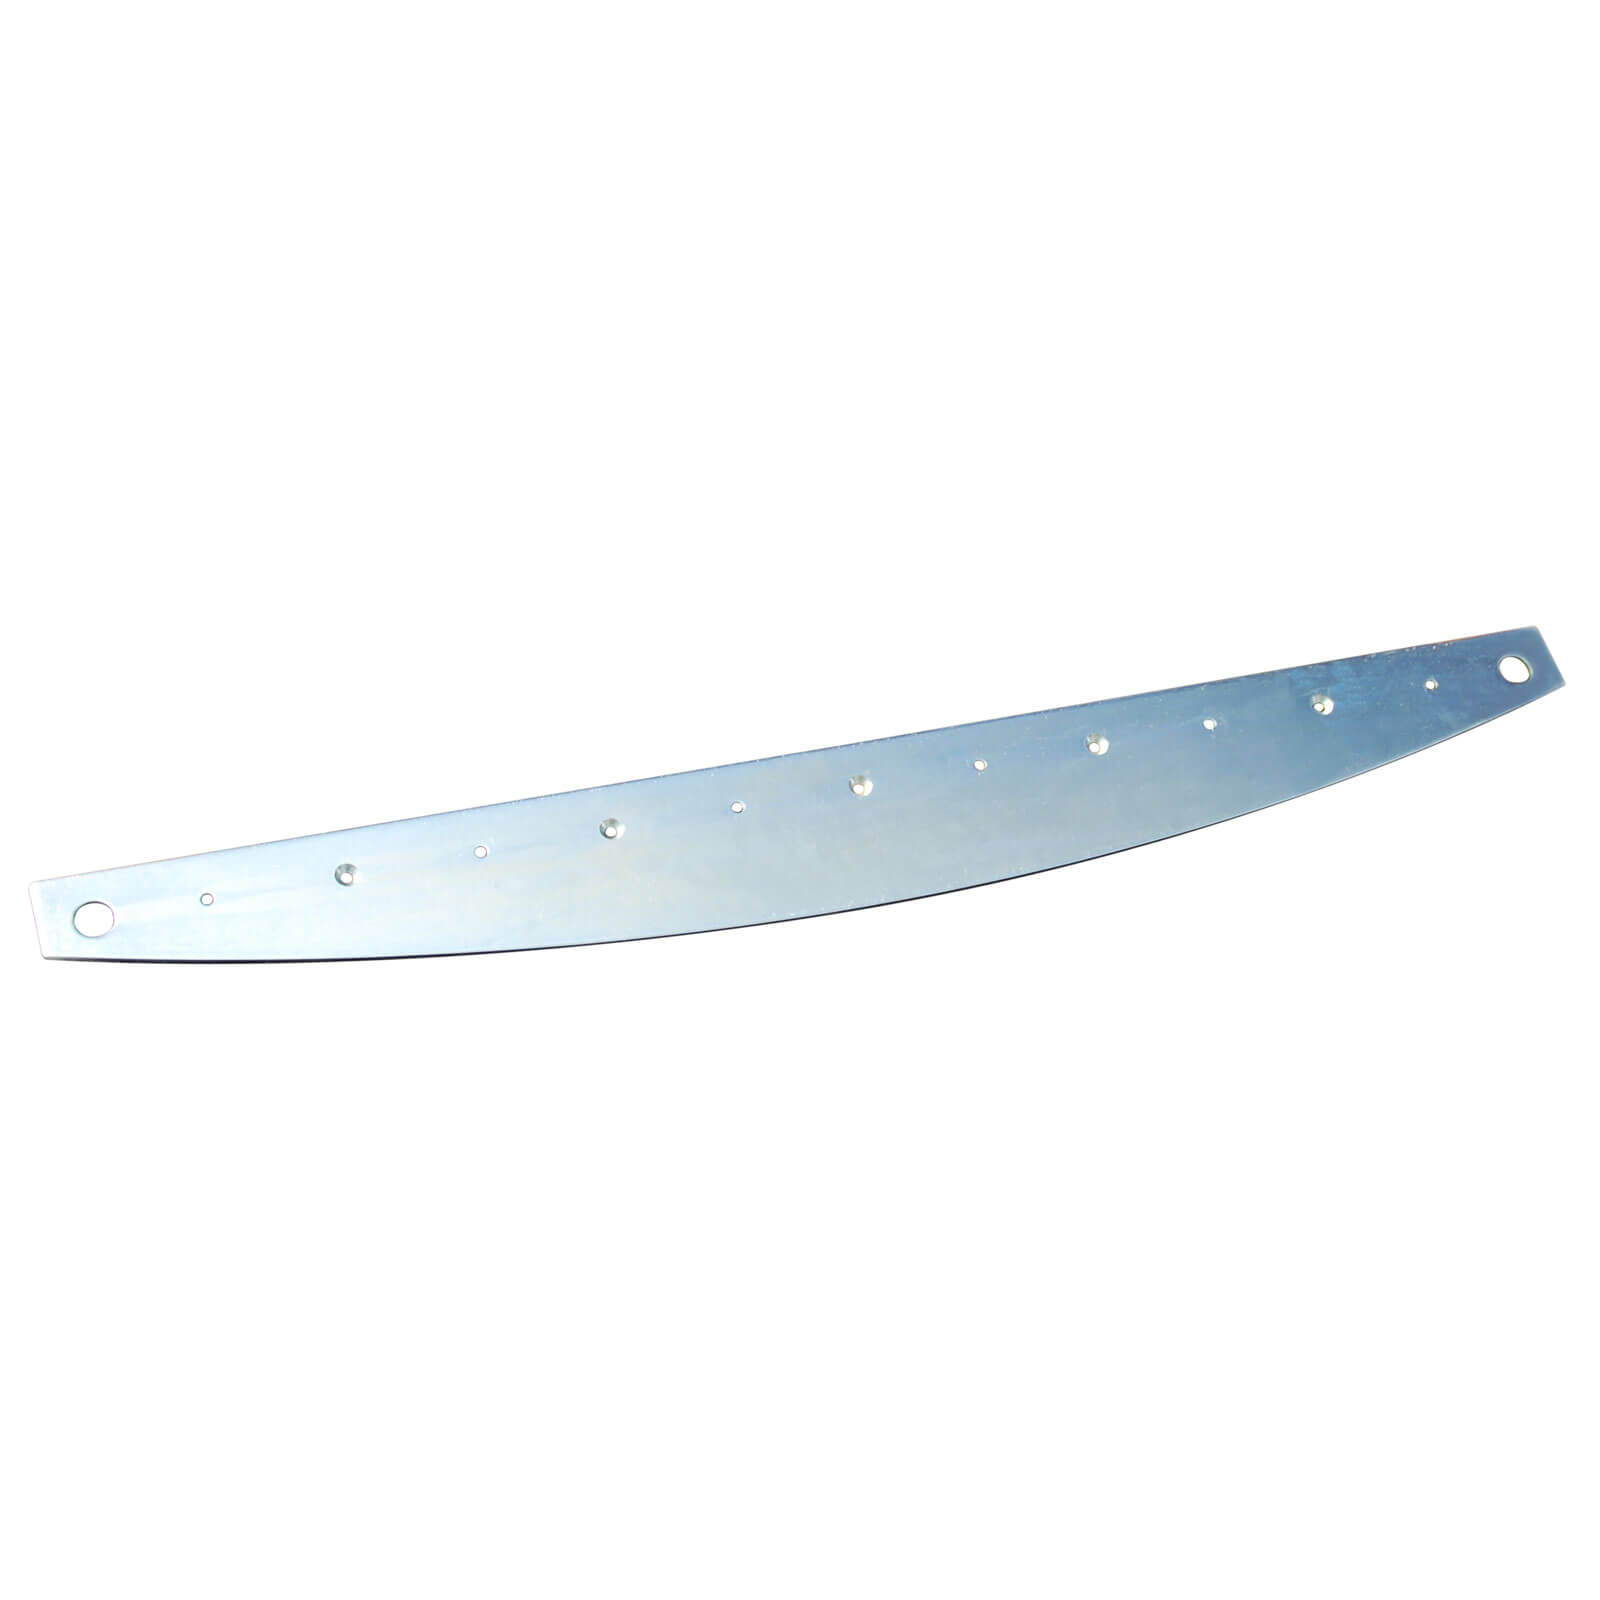 Roof Zone Shingle Shaper Replacement Blade